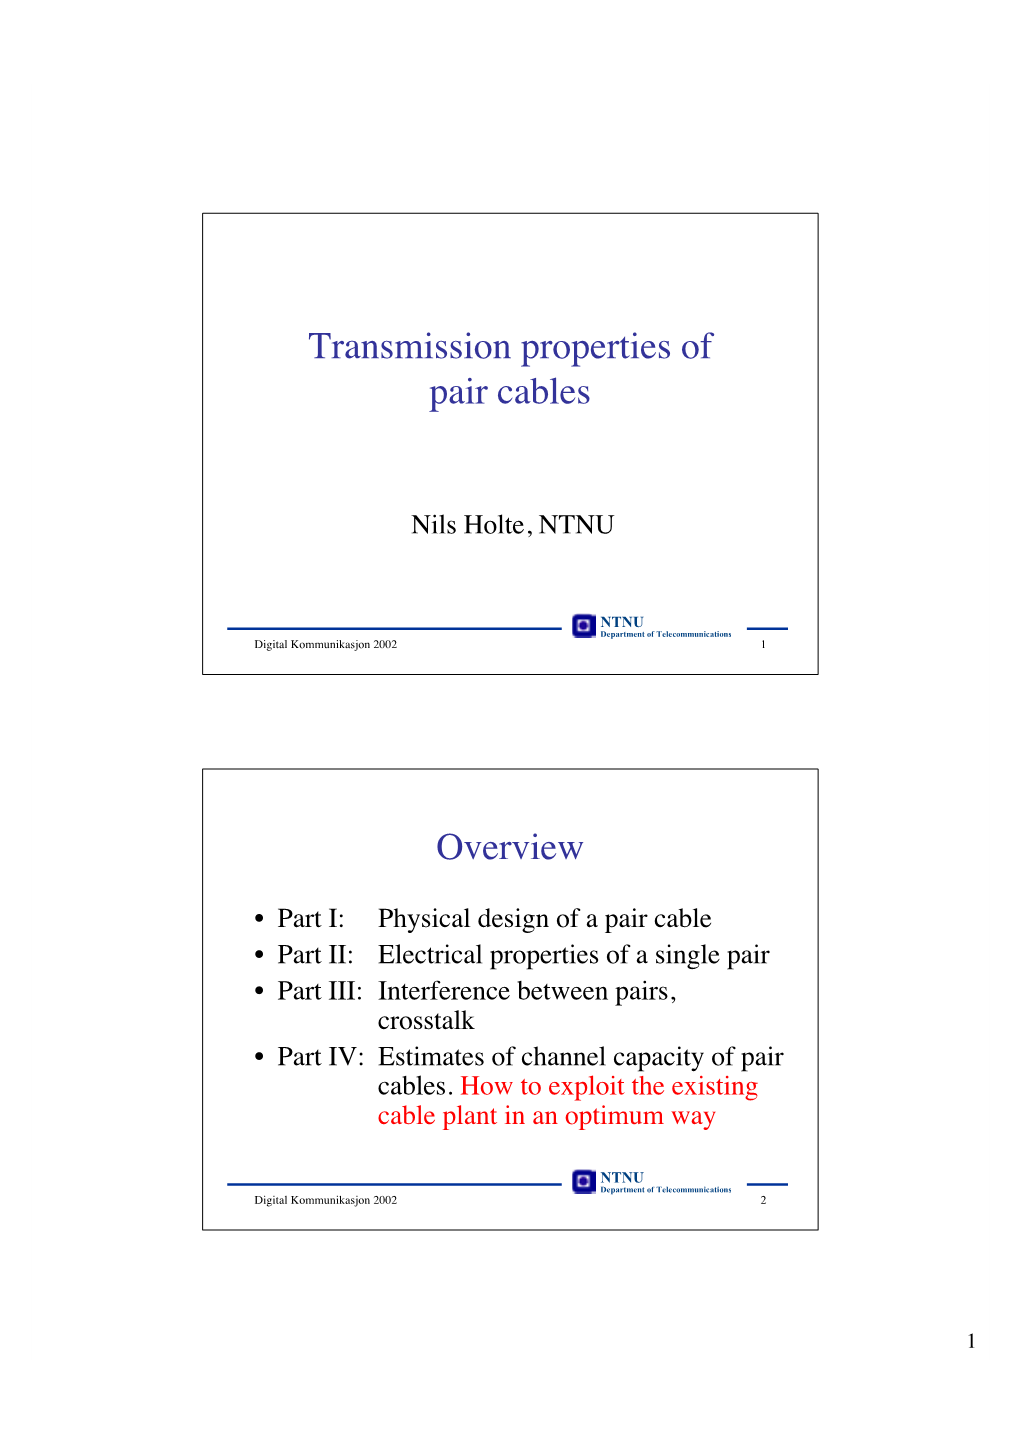 Transmission Properties of Pair Cables Overview